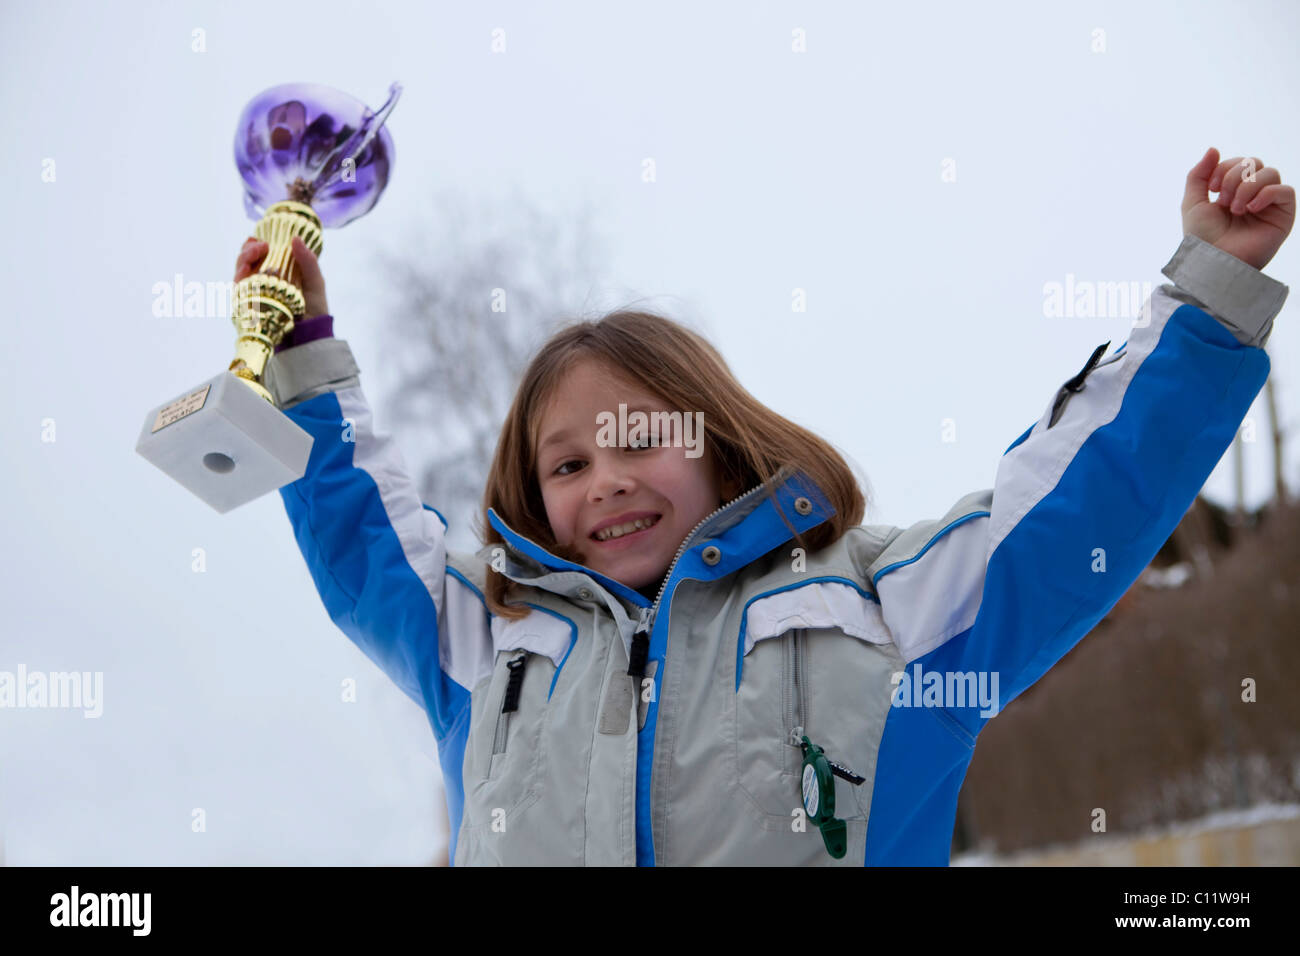 Girl, 9, rejoicing with a trophy at an awards ceremony Stock Photo